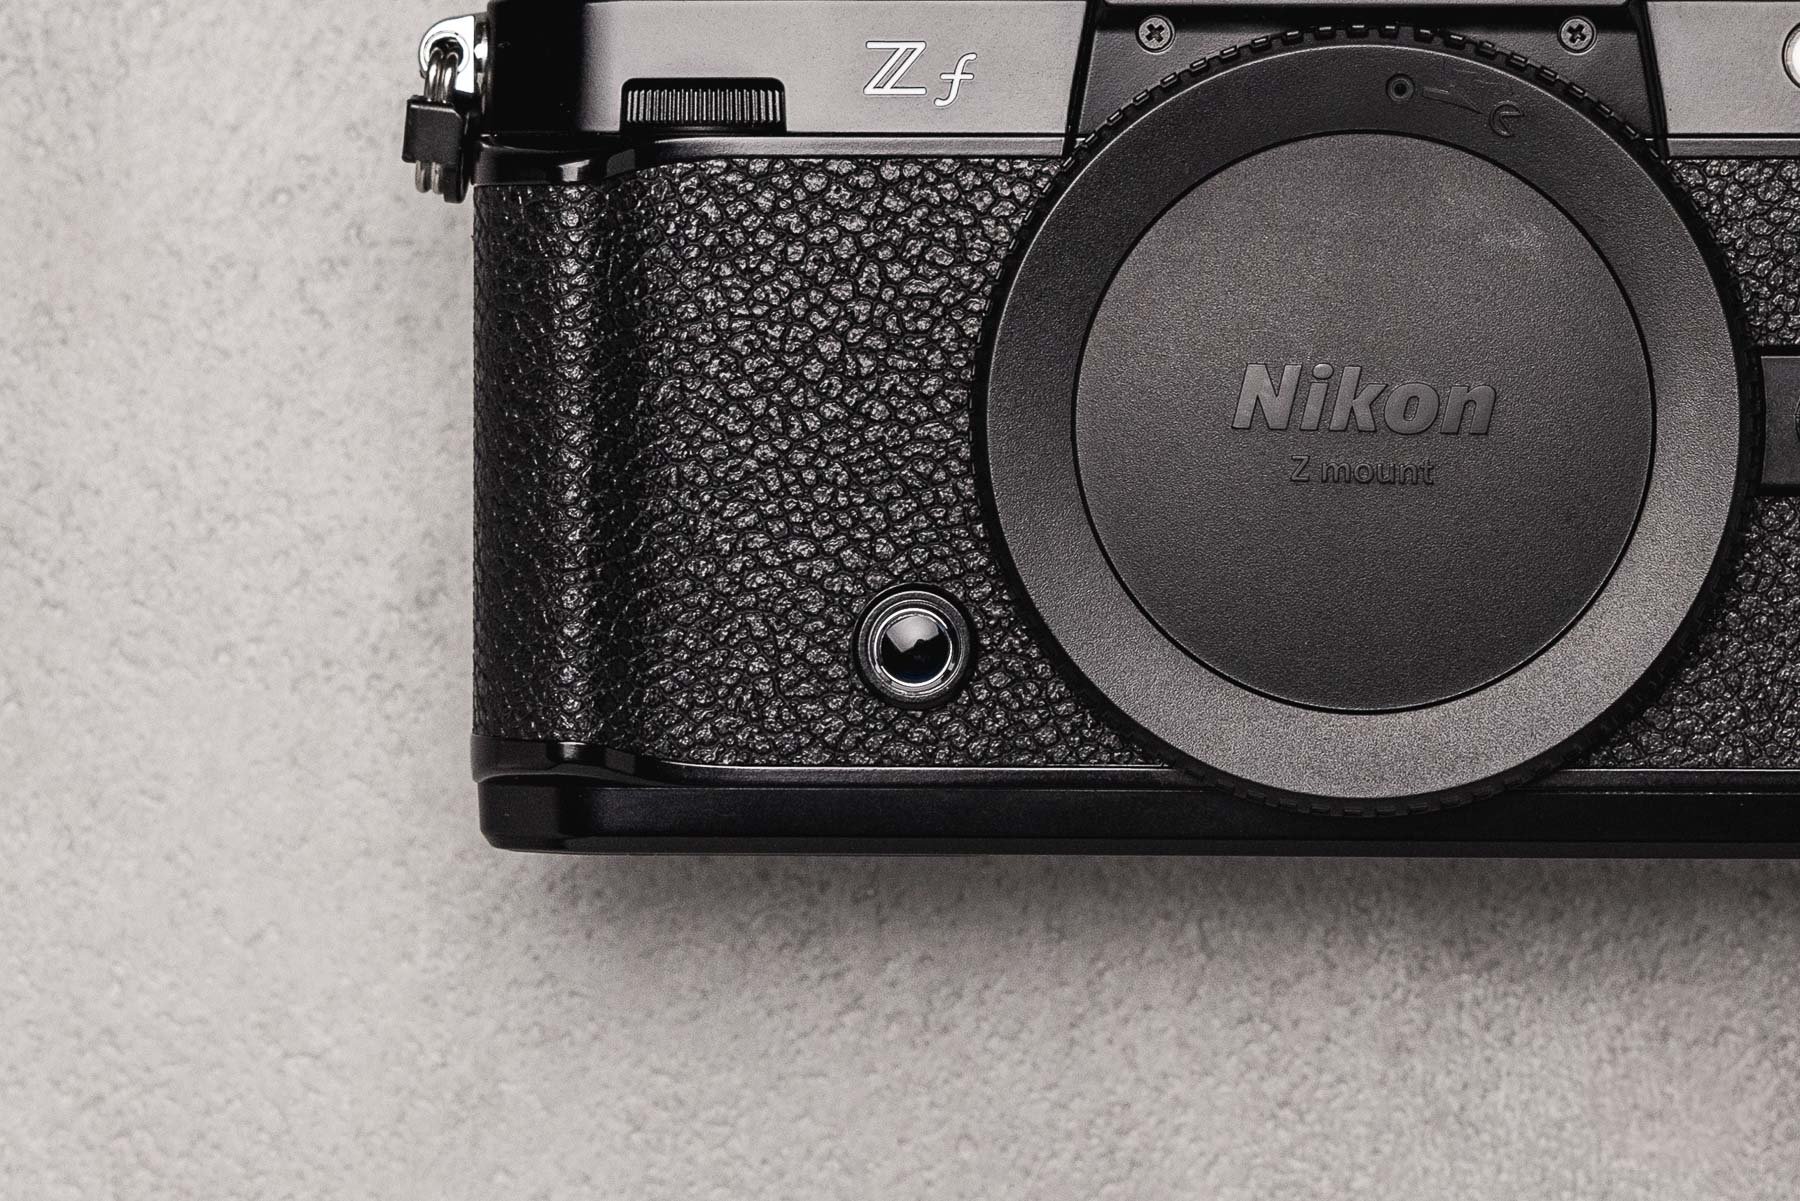 Third Time's a Charm — The Nikon Zf Review